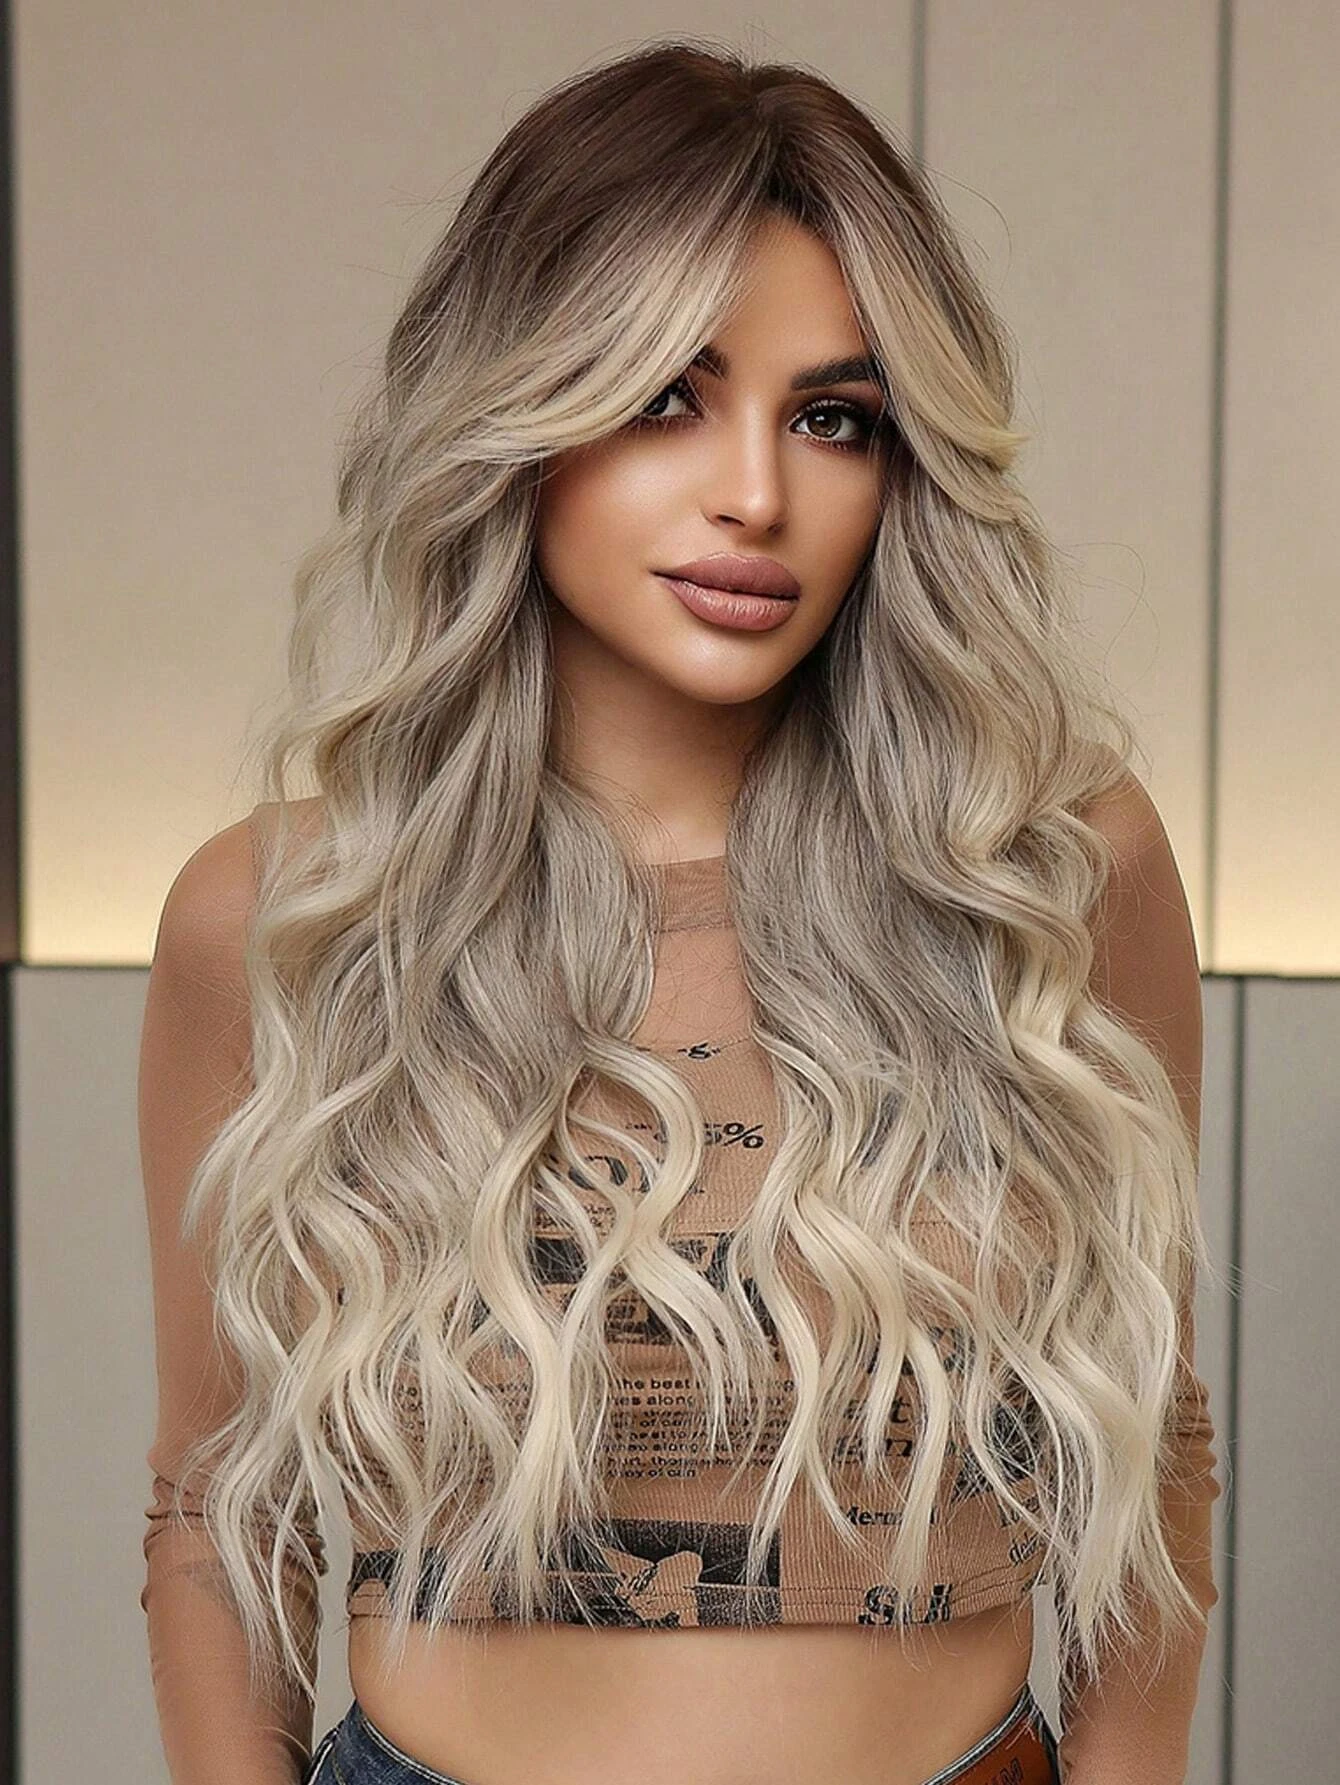 16 Tips To Make Your Wig Look More Natural – Xrs Beauty Hair